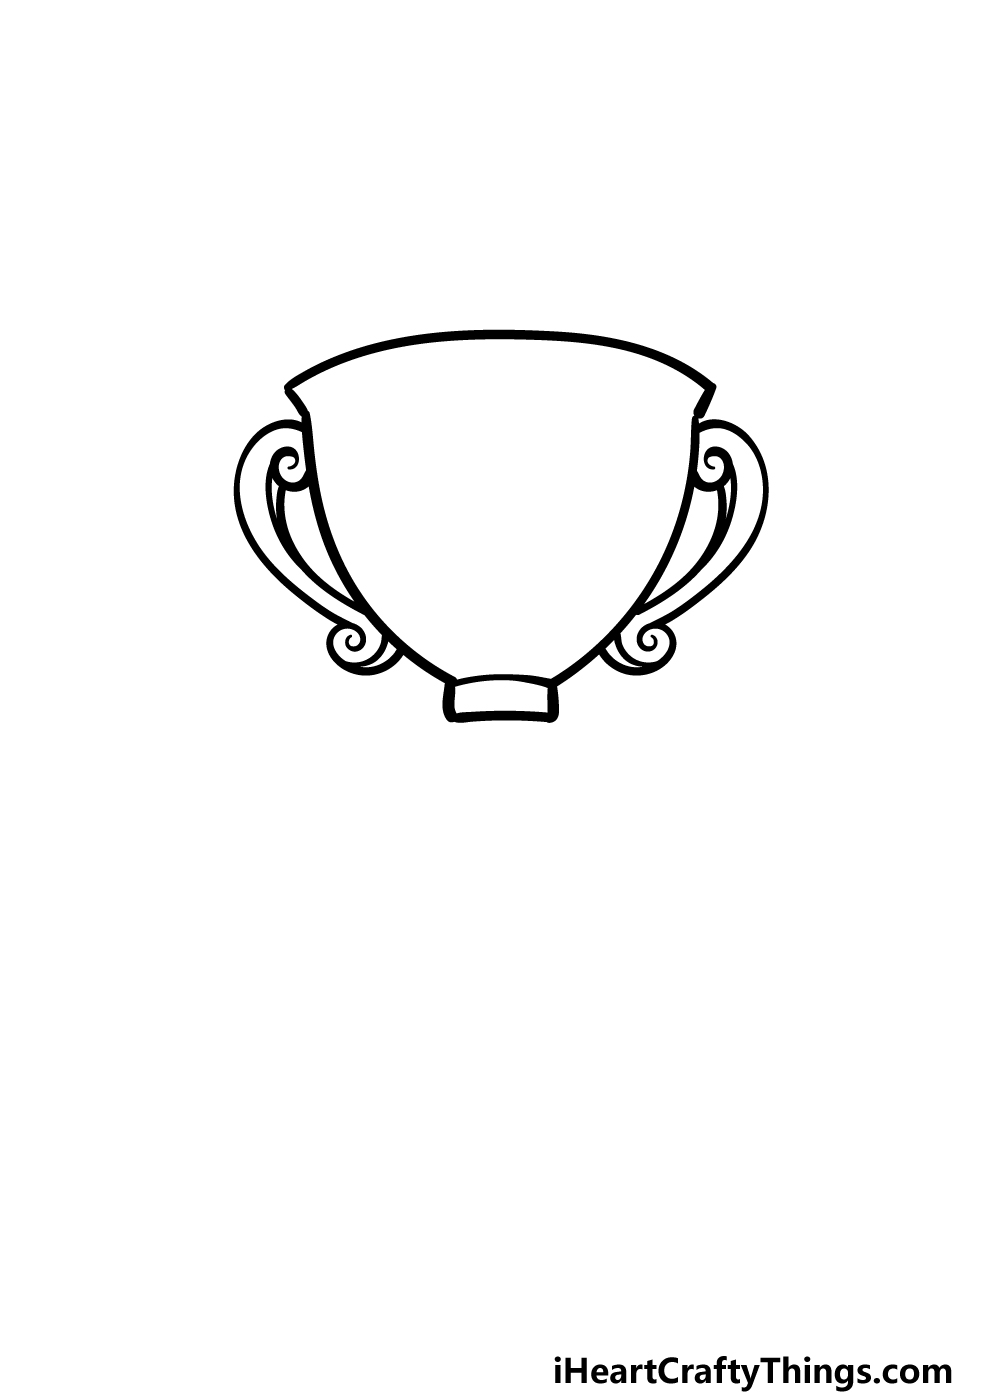 how to draw a trophy step 2